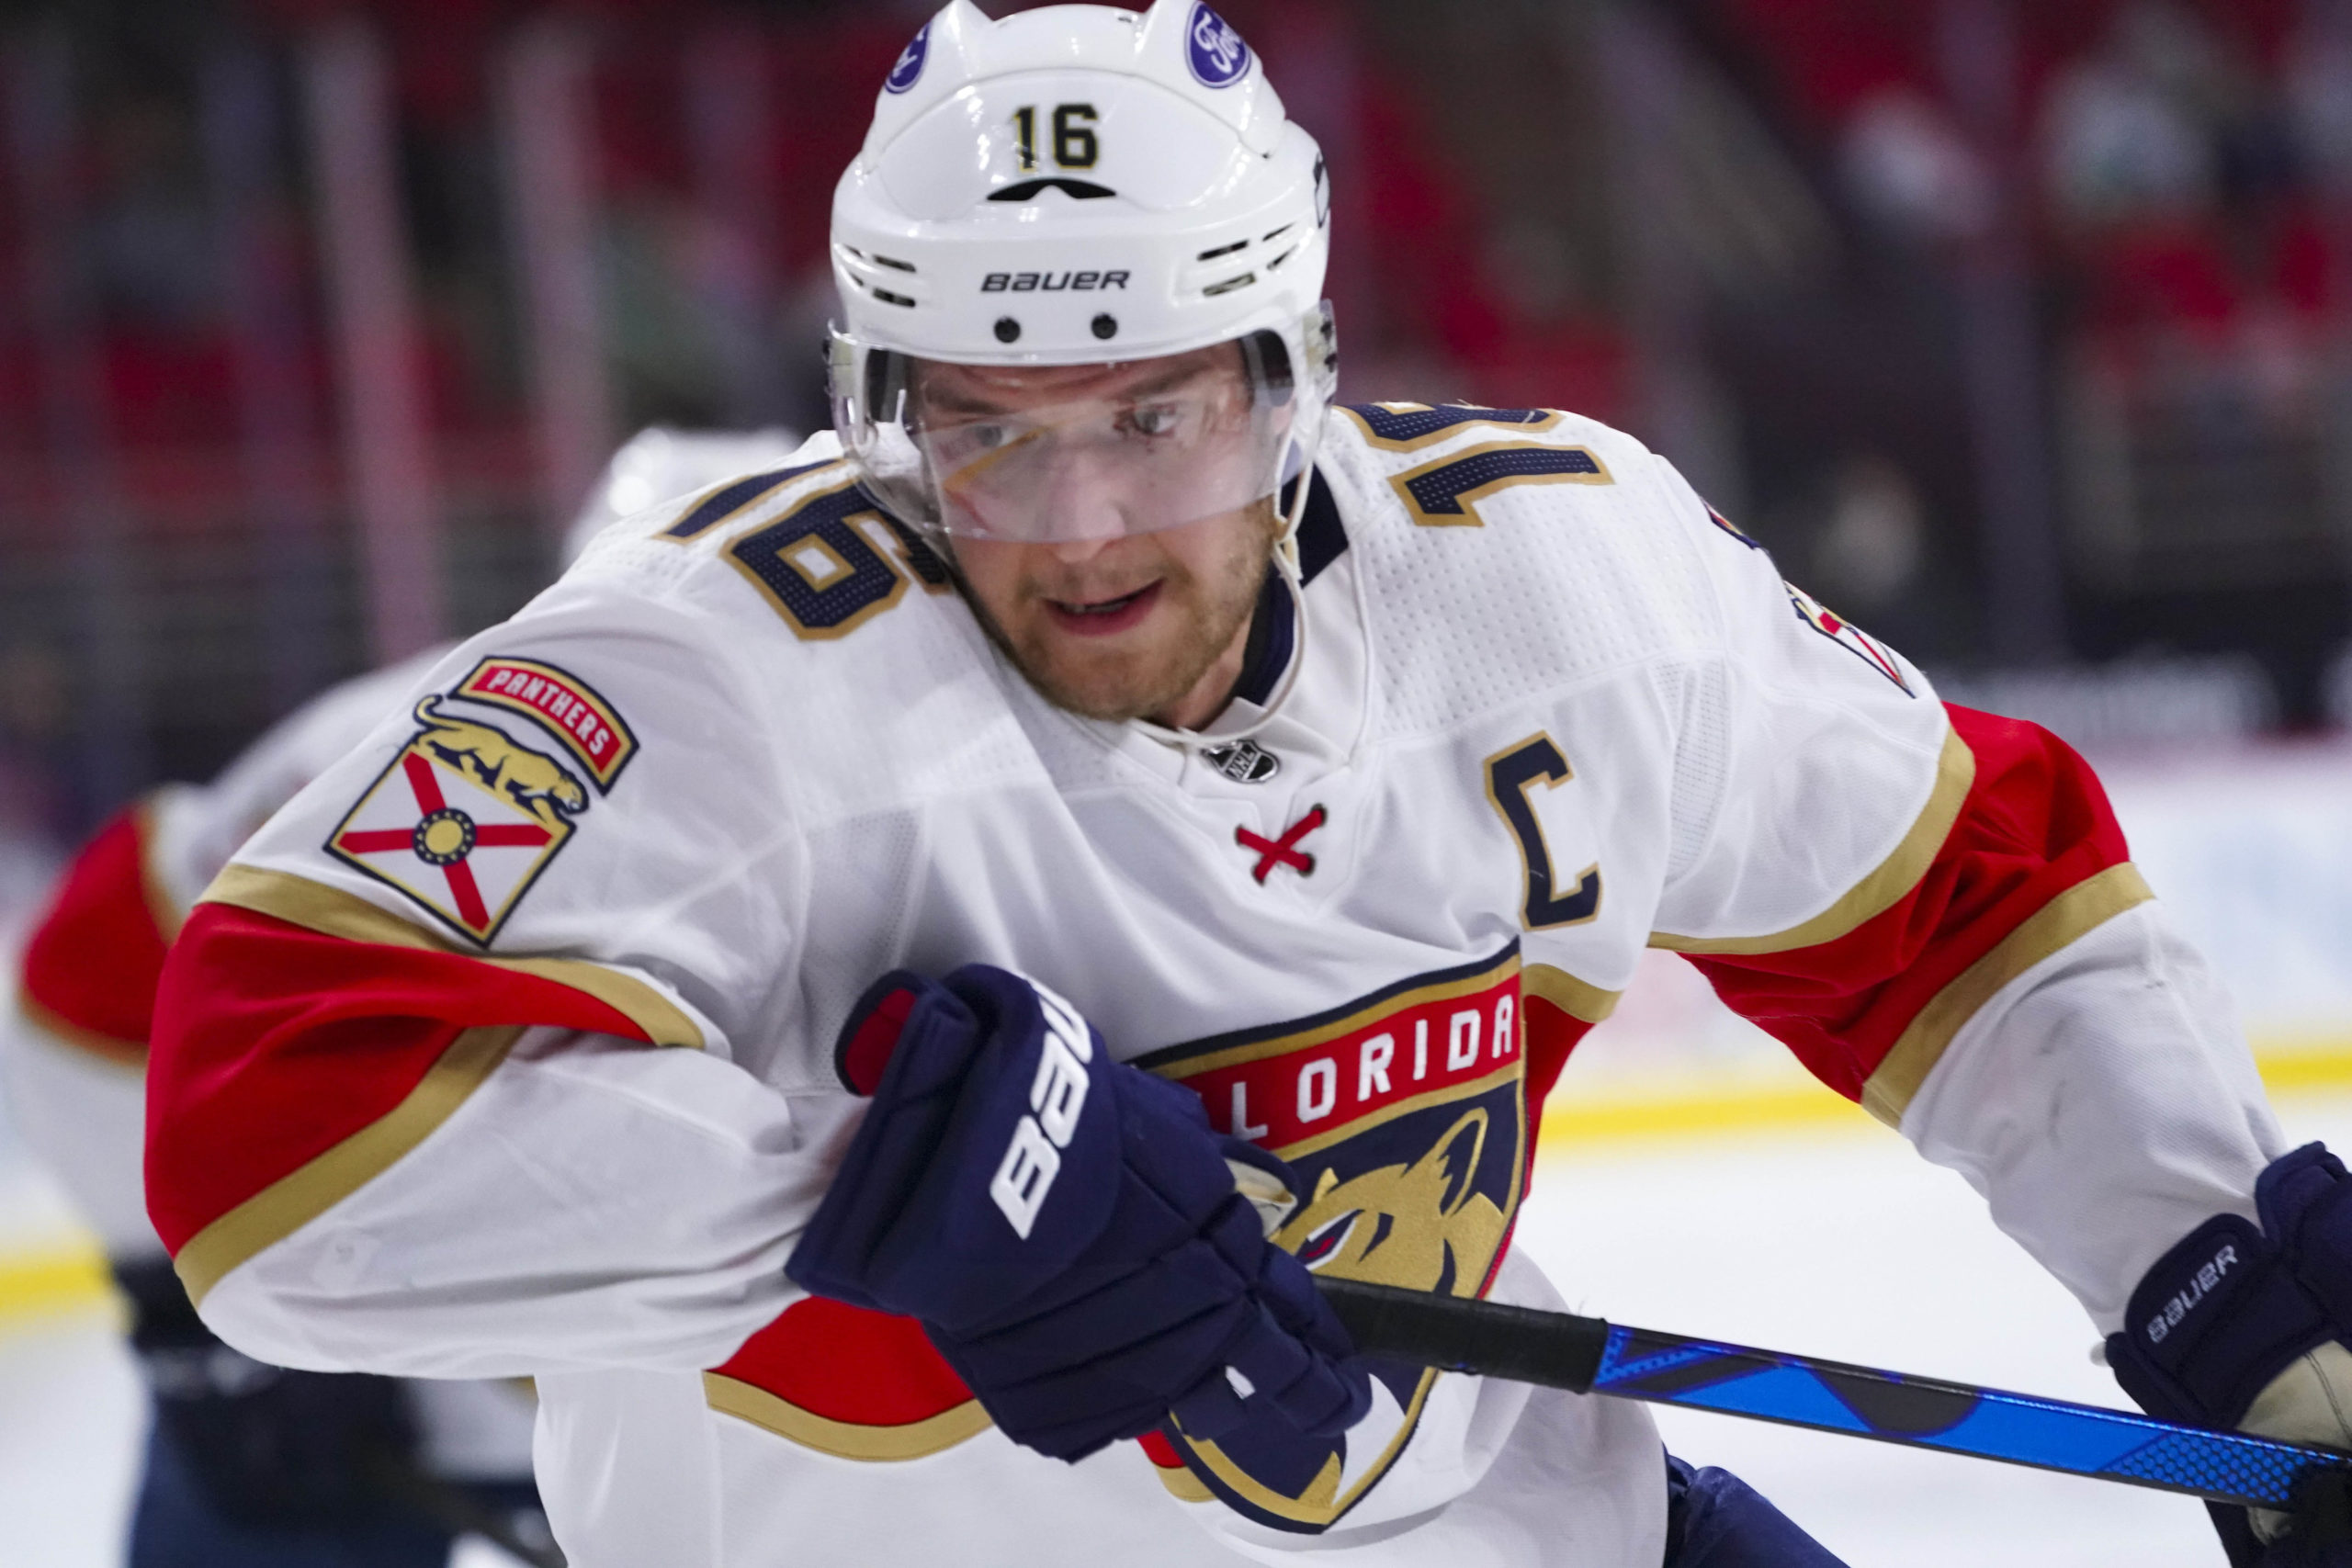 Maple Leafs sign Giordano to 2-year extension with $800K AAV